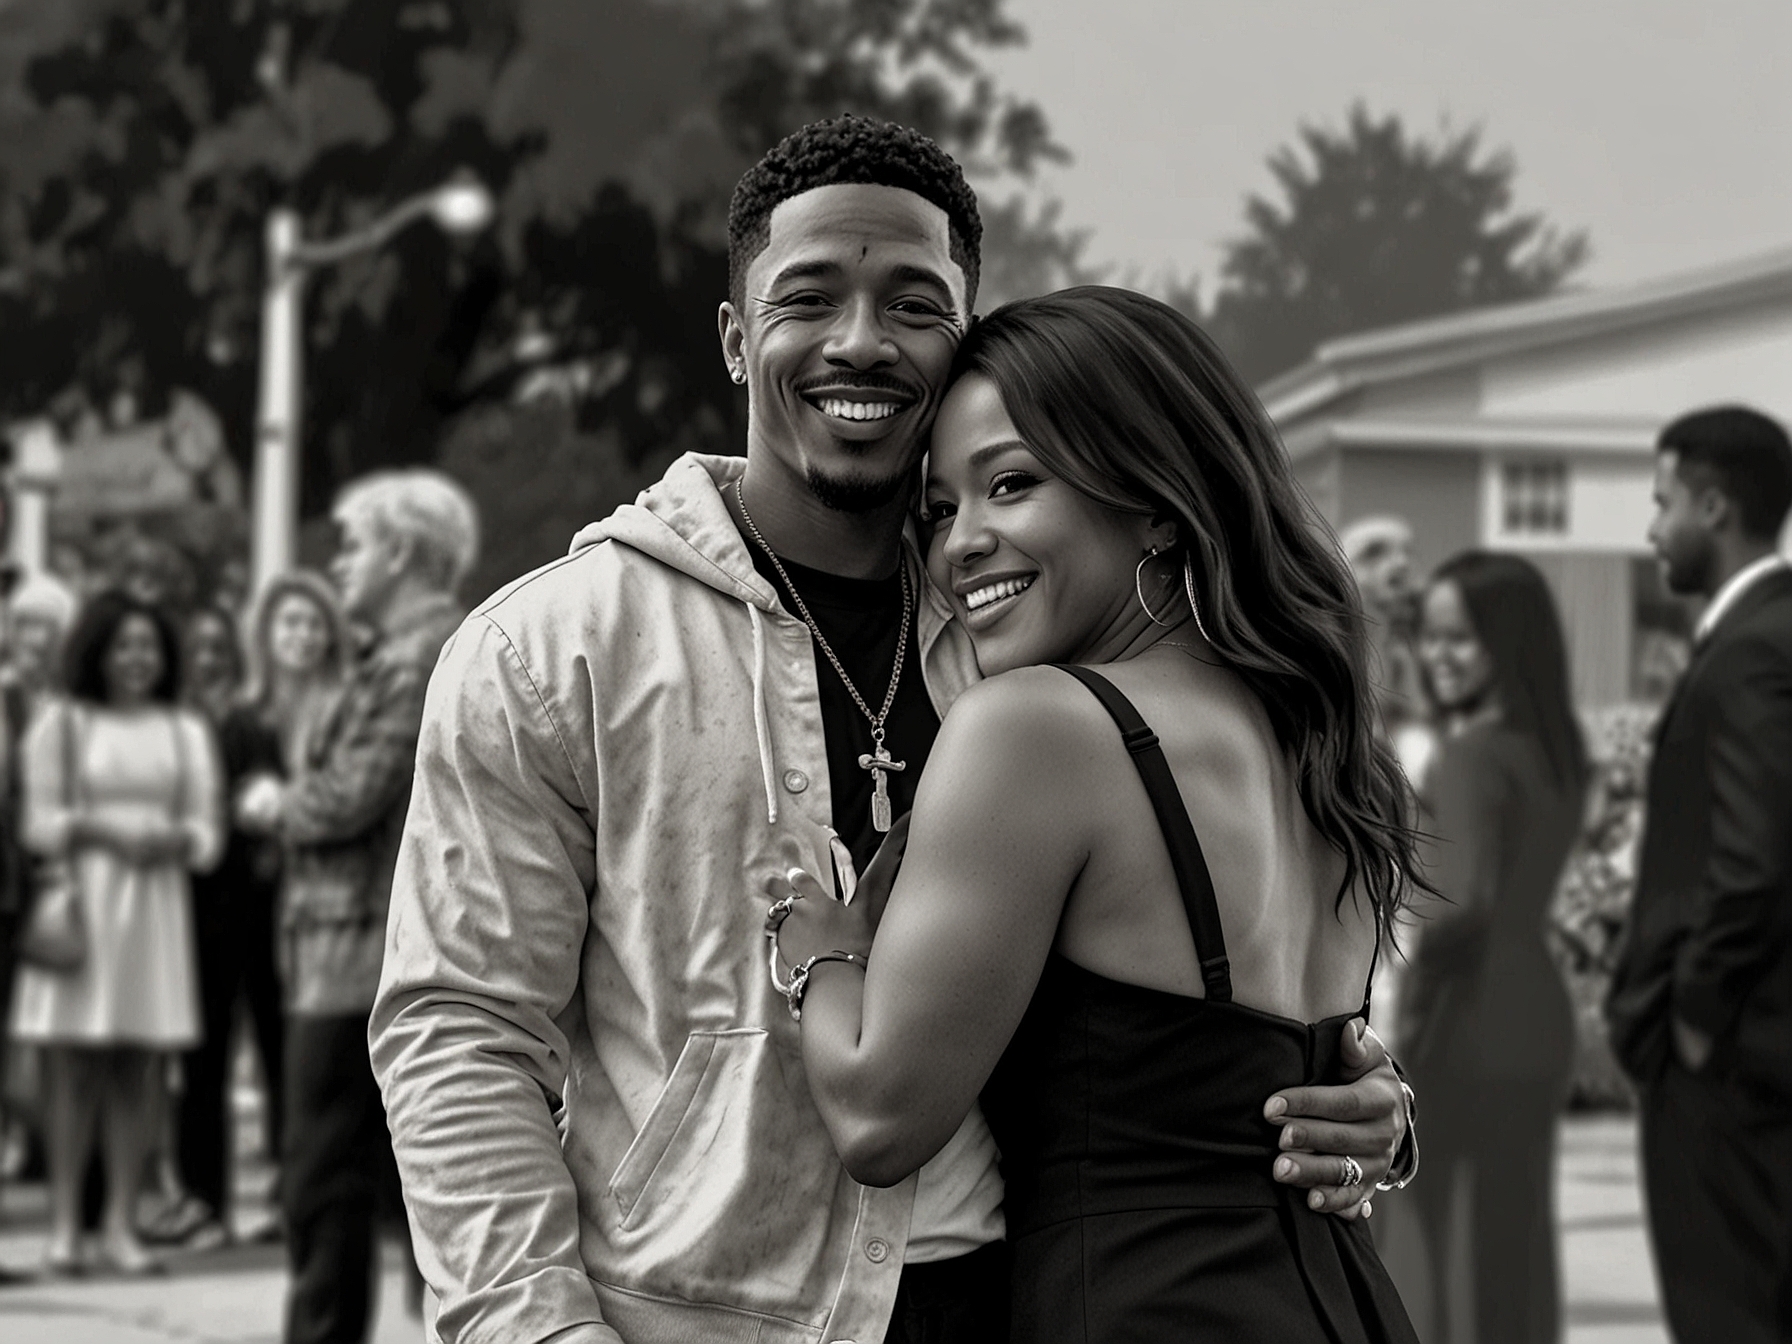 Nick Cannon and Alyssa Scott, holding each other's hands and smiling, surrounded by family and friends during a memorial celebration for their late son Zen, illustrating unity and love.